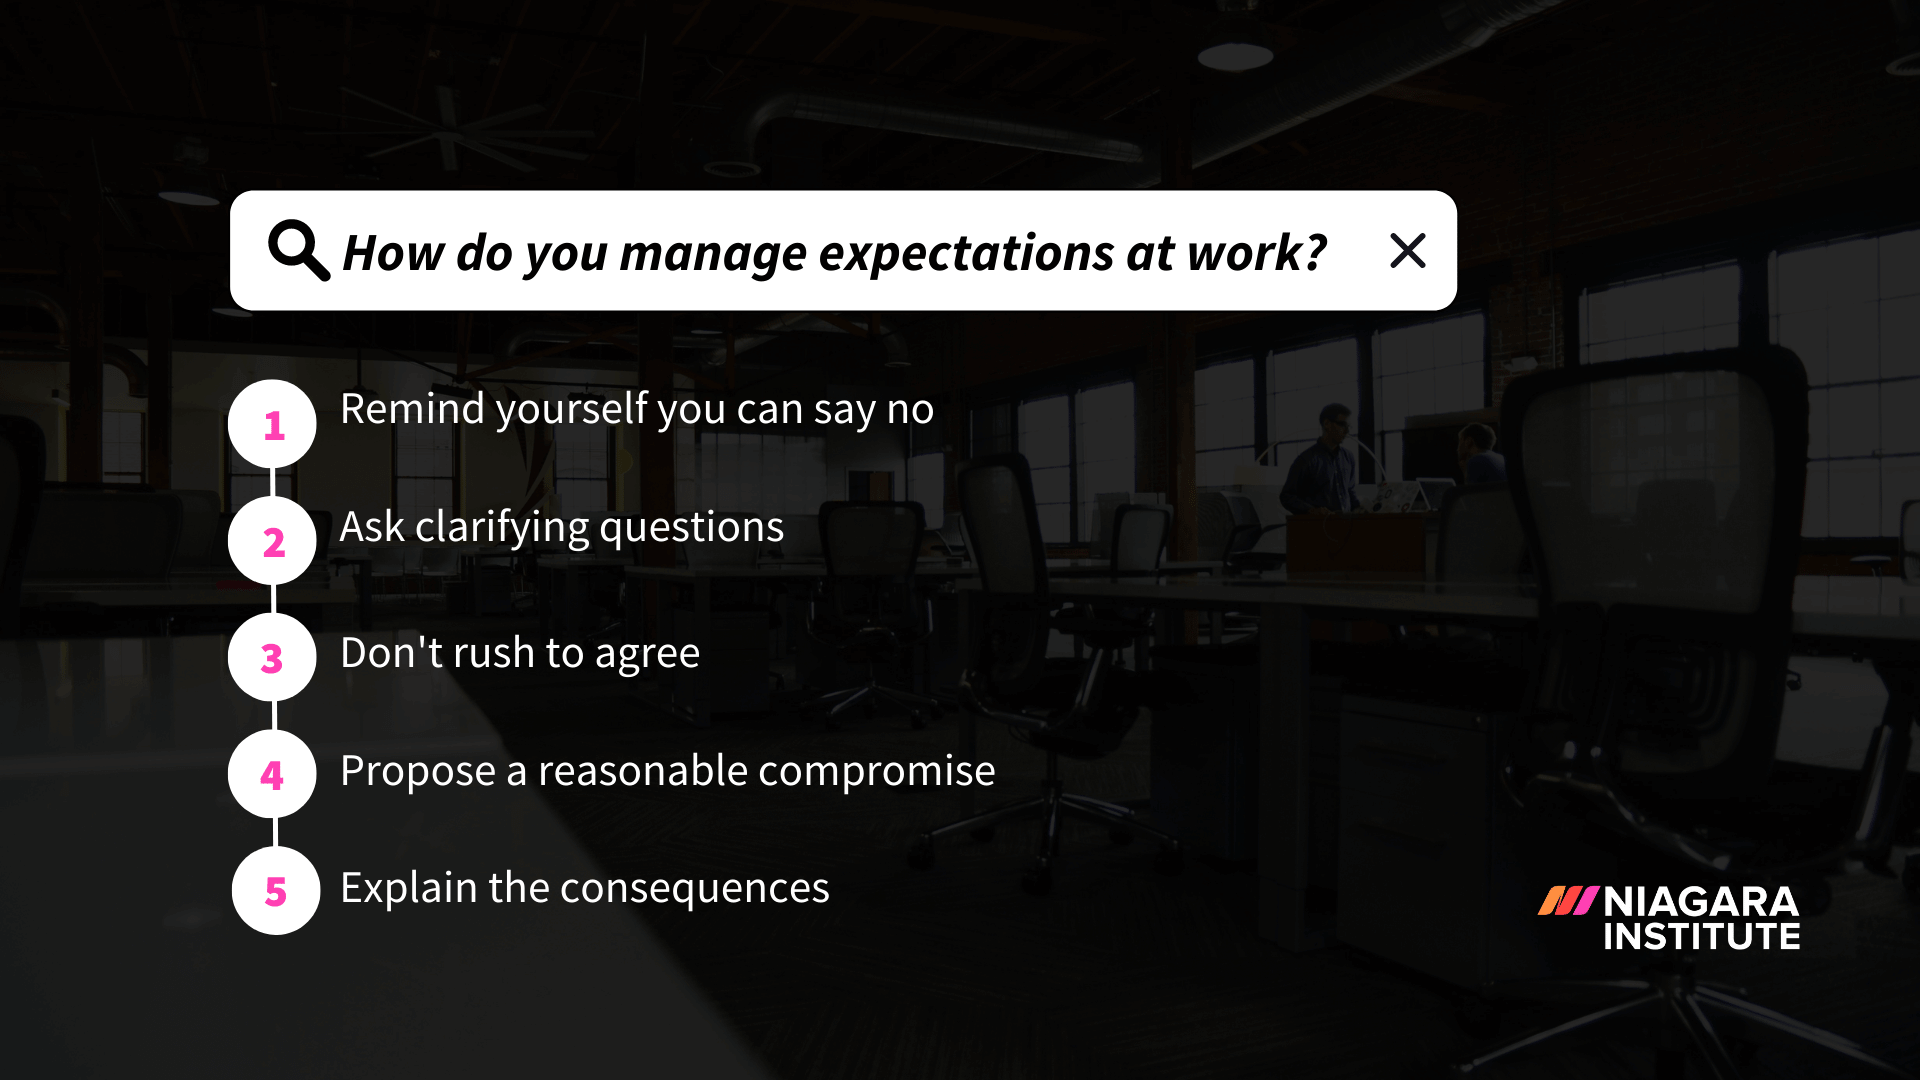 How Do You Manage Expectations at Work - Niagara Institute (1)